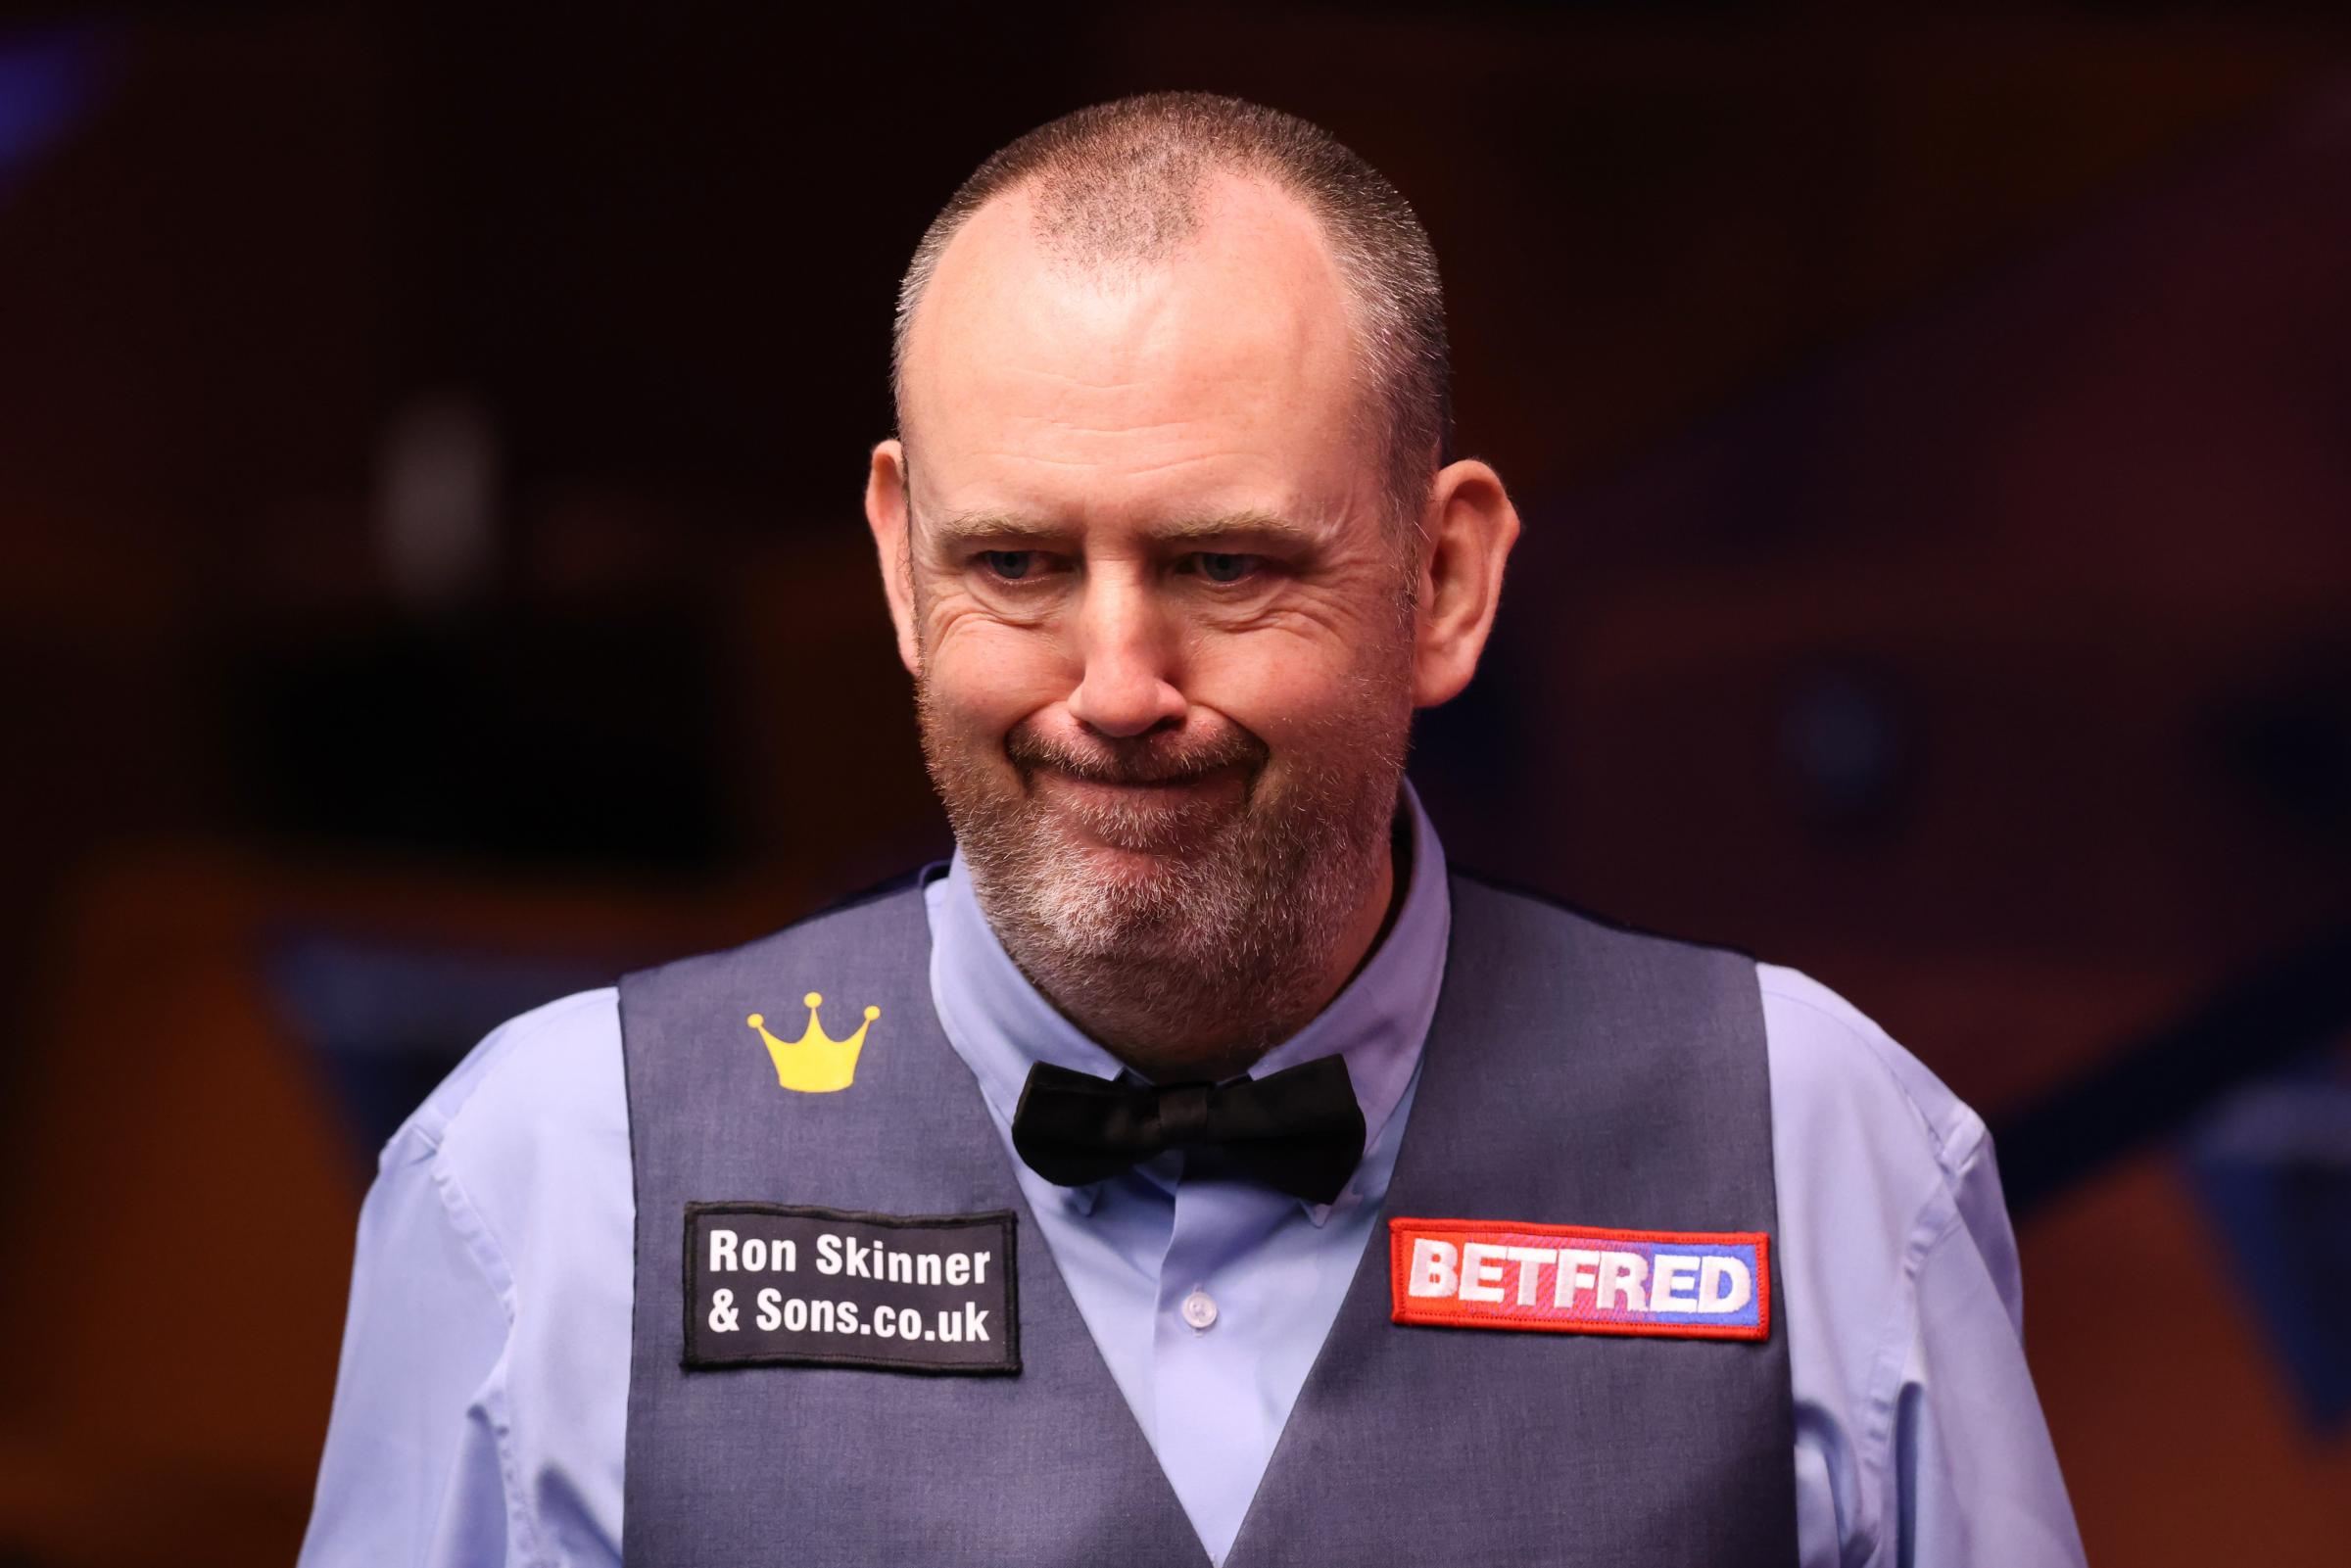 Mark Williams in action during day five of the Betfred World Snooker Championships 2021 at The Crucible, Sheffield. Picture date: Wednesday April 21, 2021.